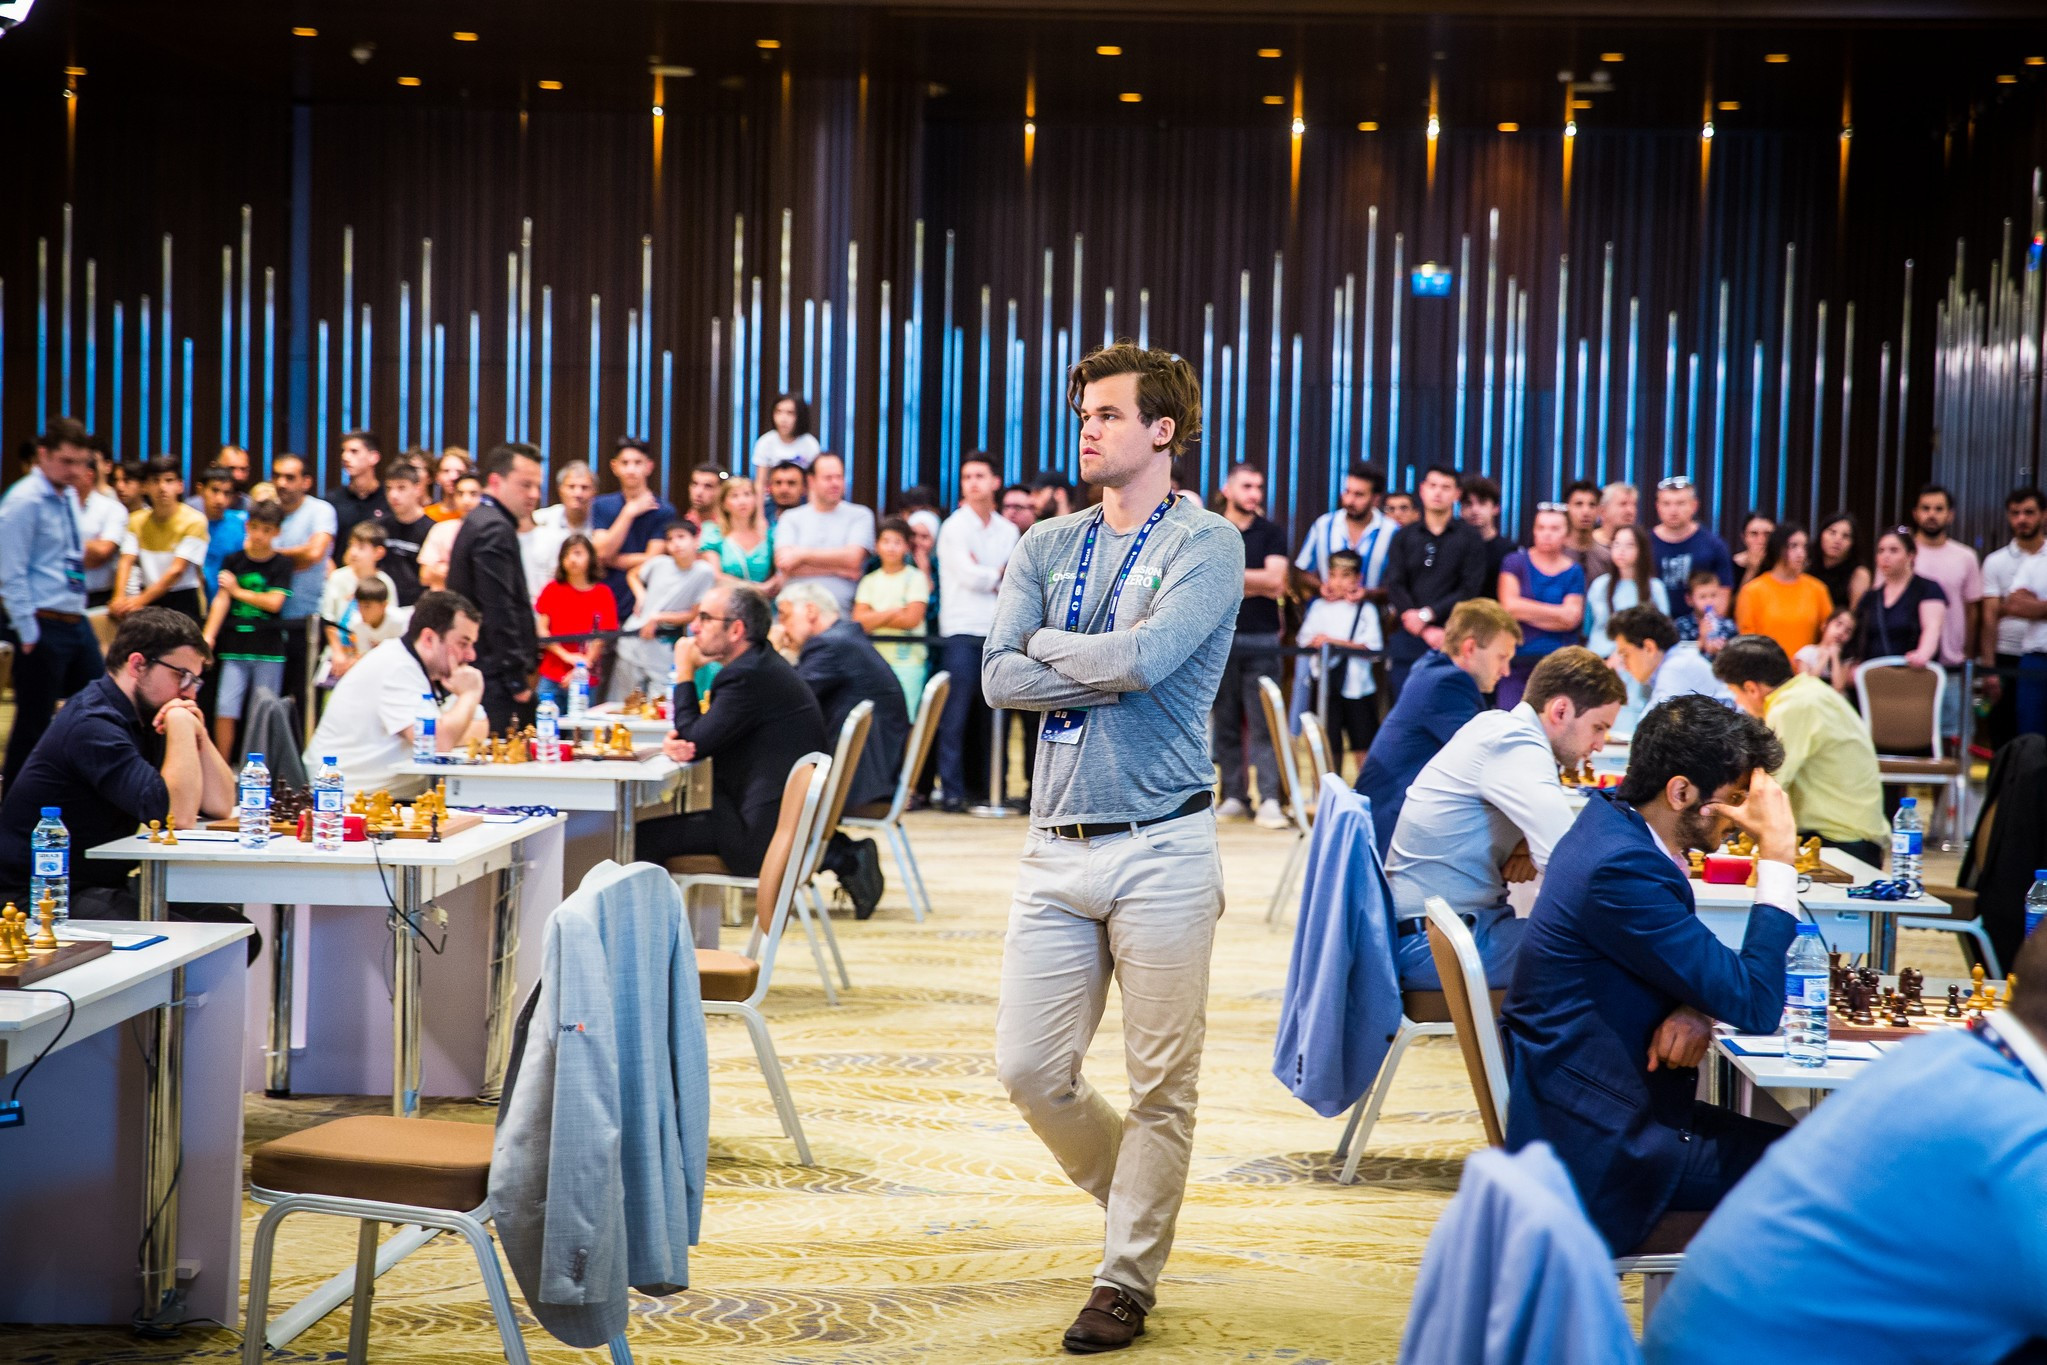 Carlsen among winners as draws dominate start of third round at FIDE World Cup